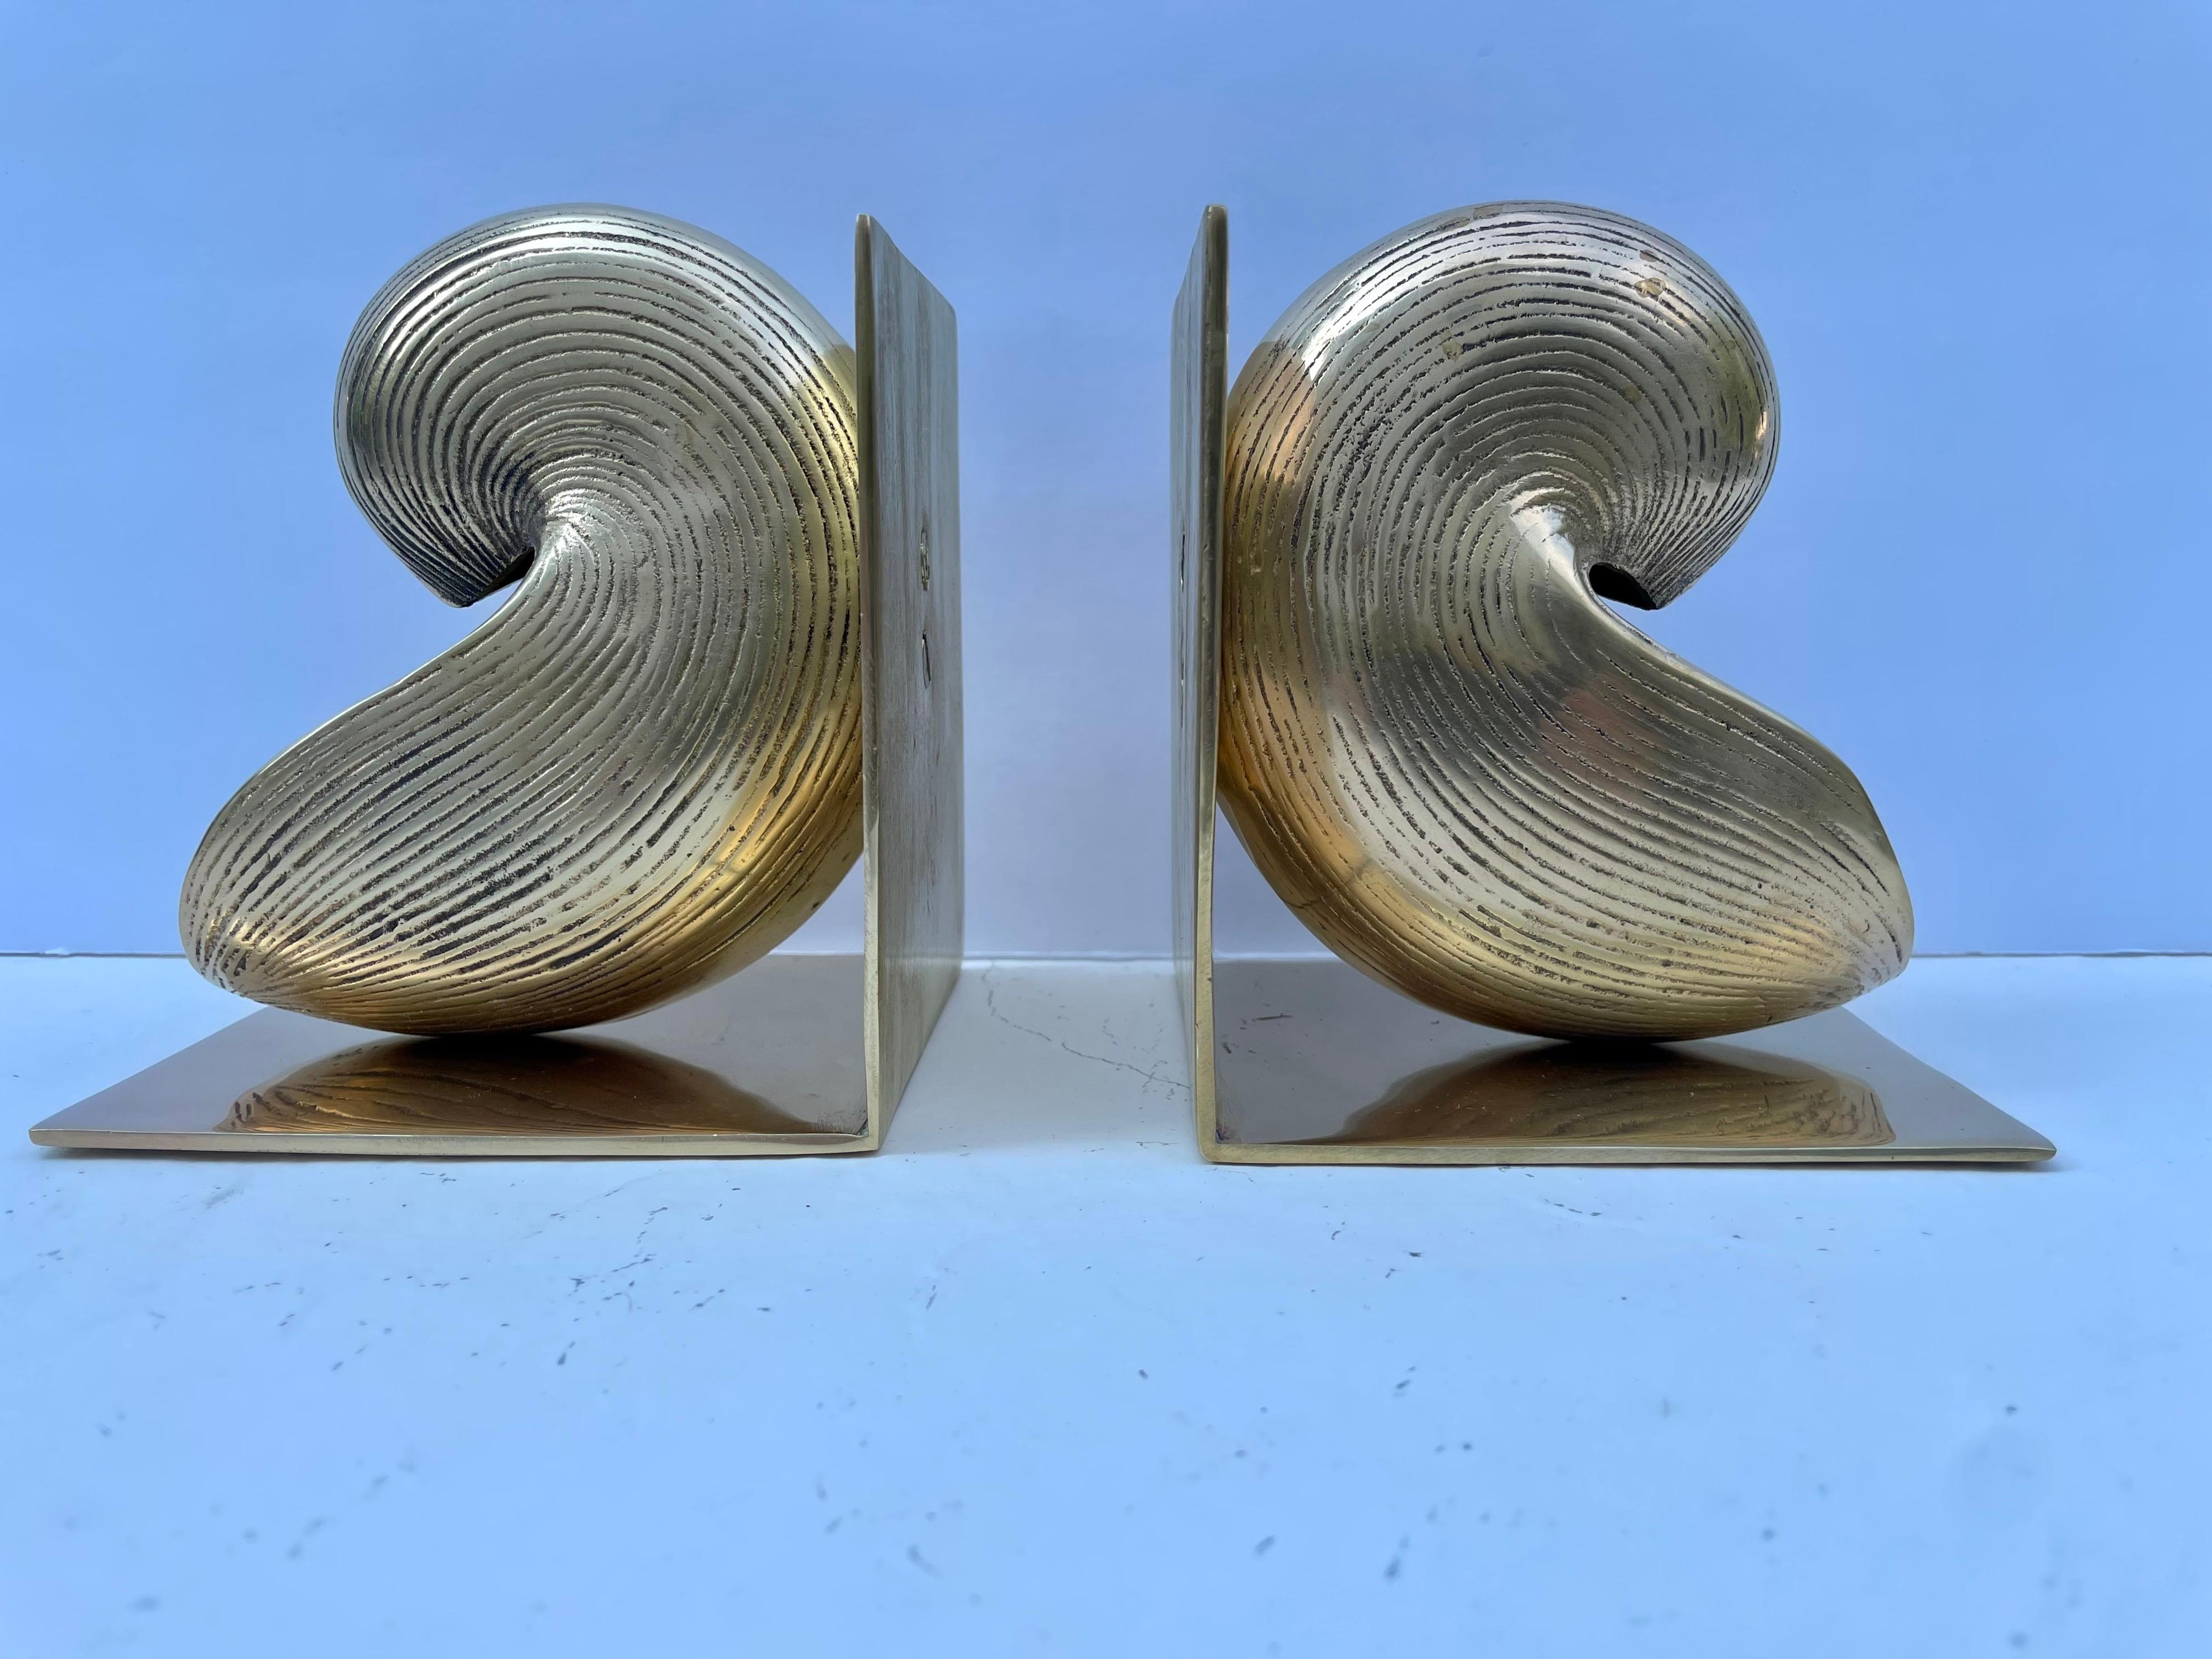 Brass nautical bookends. Nice detail in casting, heavy weight with substantial feel. Holds a shelves worth of books. Good condition, some light patina. Great for your beach house! 

Each bookend is 4.25 W x 5 H x 3.75 deep (8.5 wide overall).